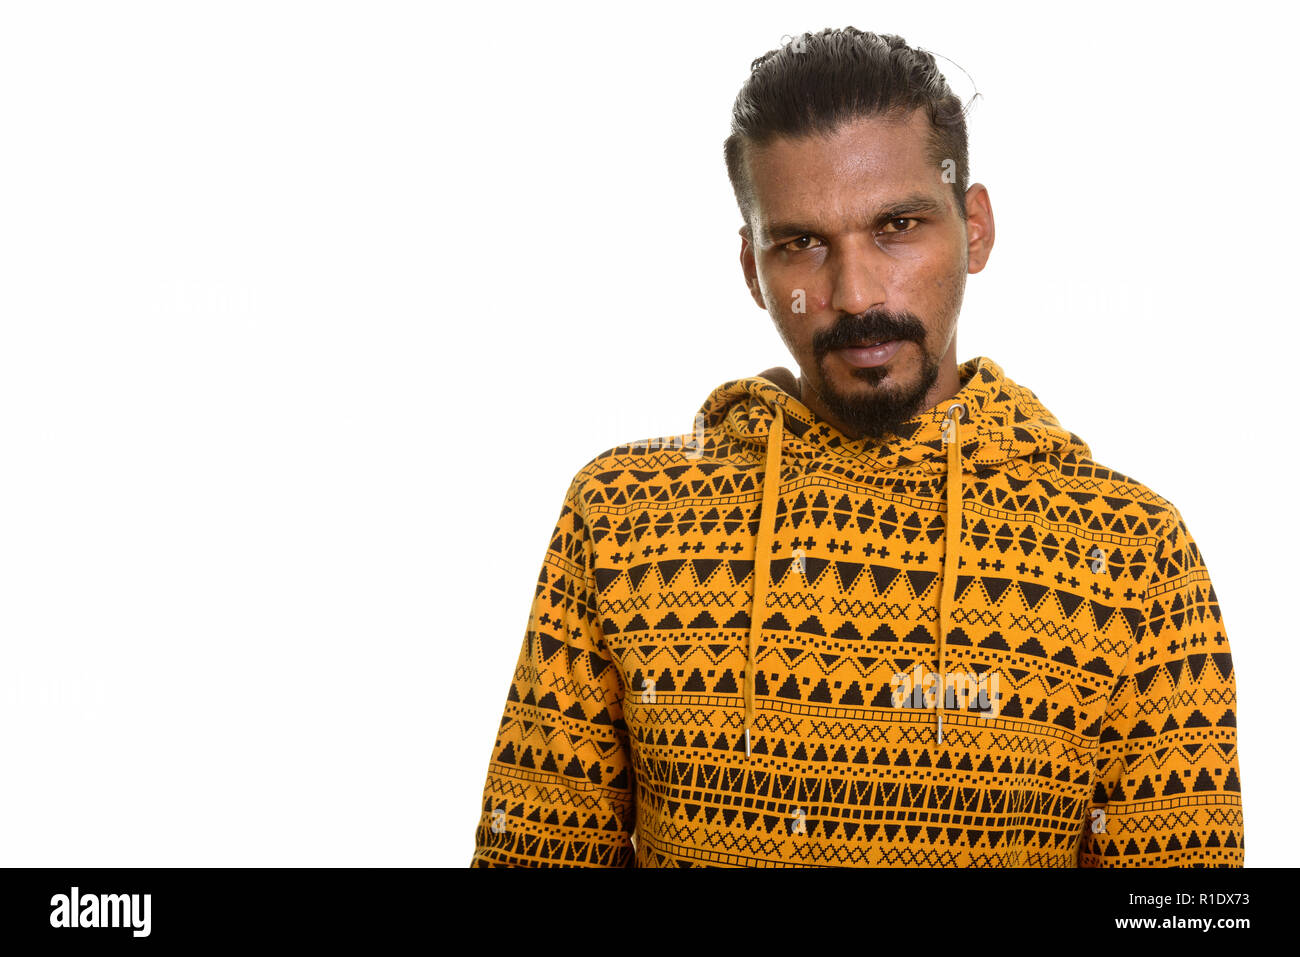 Young Indian man studio portrait against white background Stock Photo